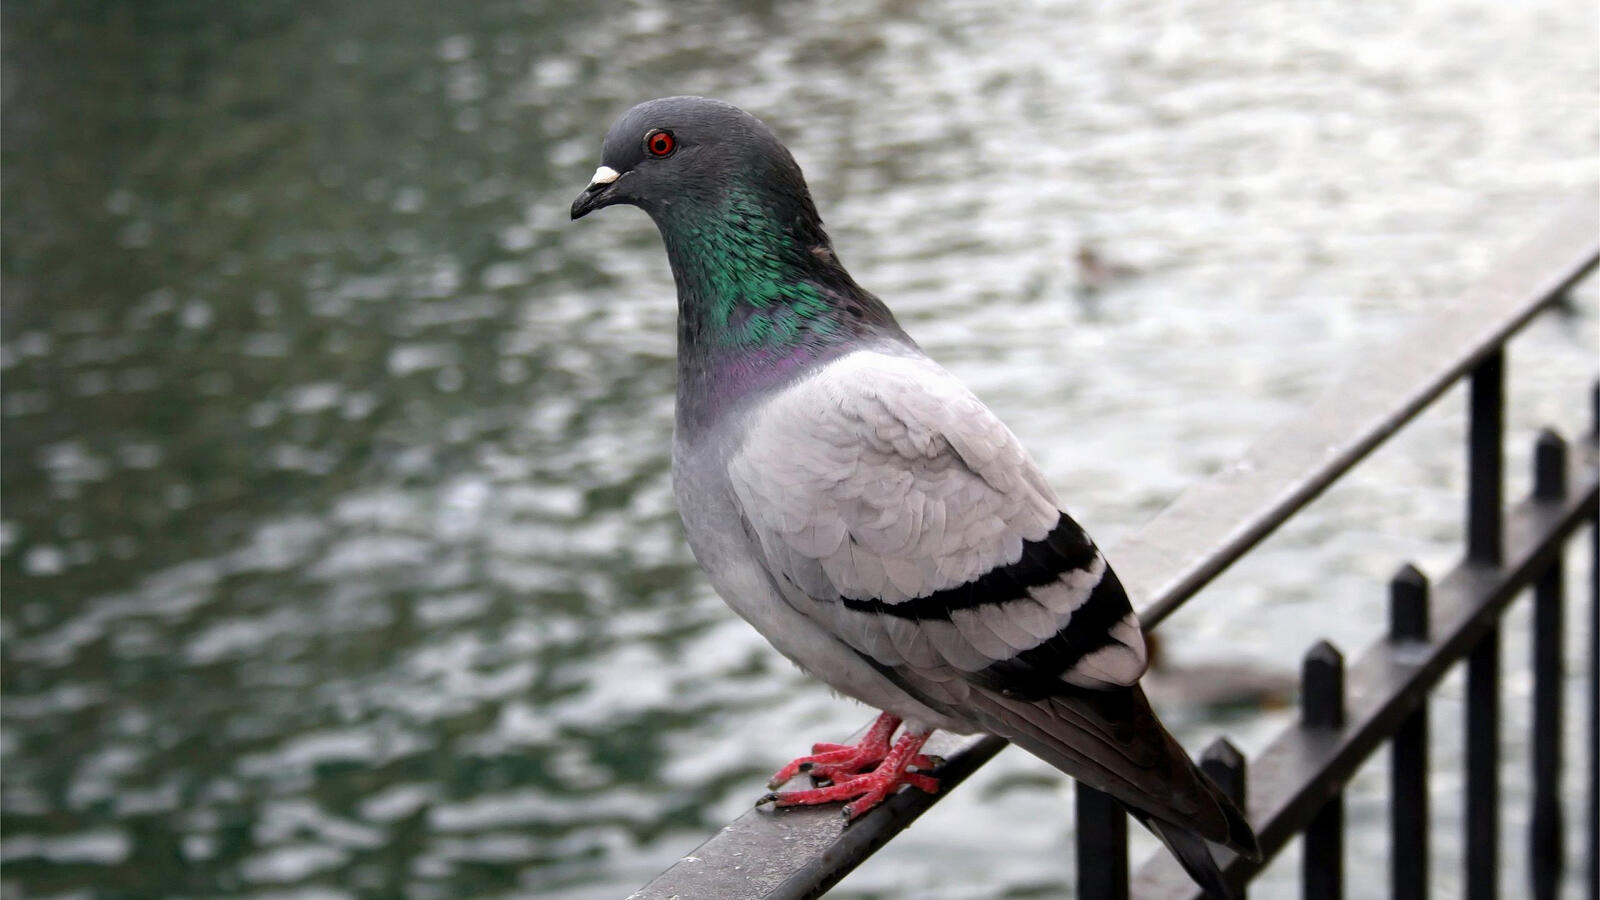 Free photo A pigeon sits on a railing by the river